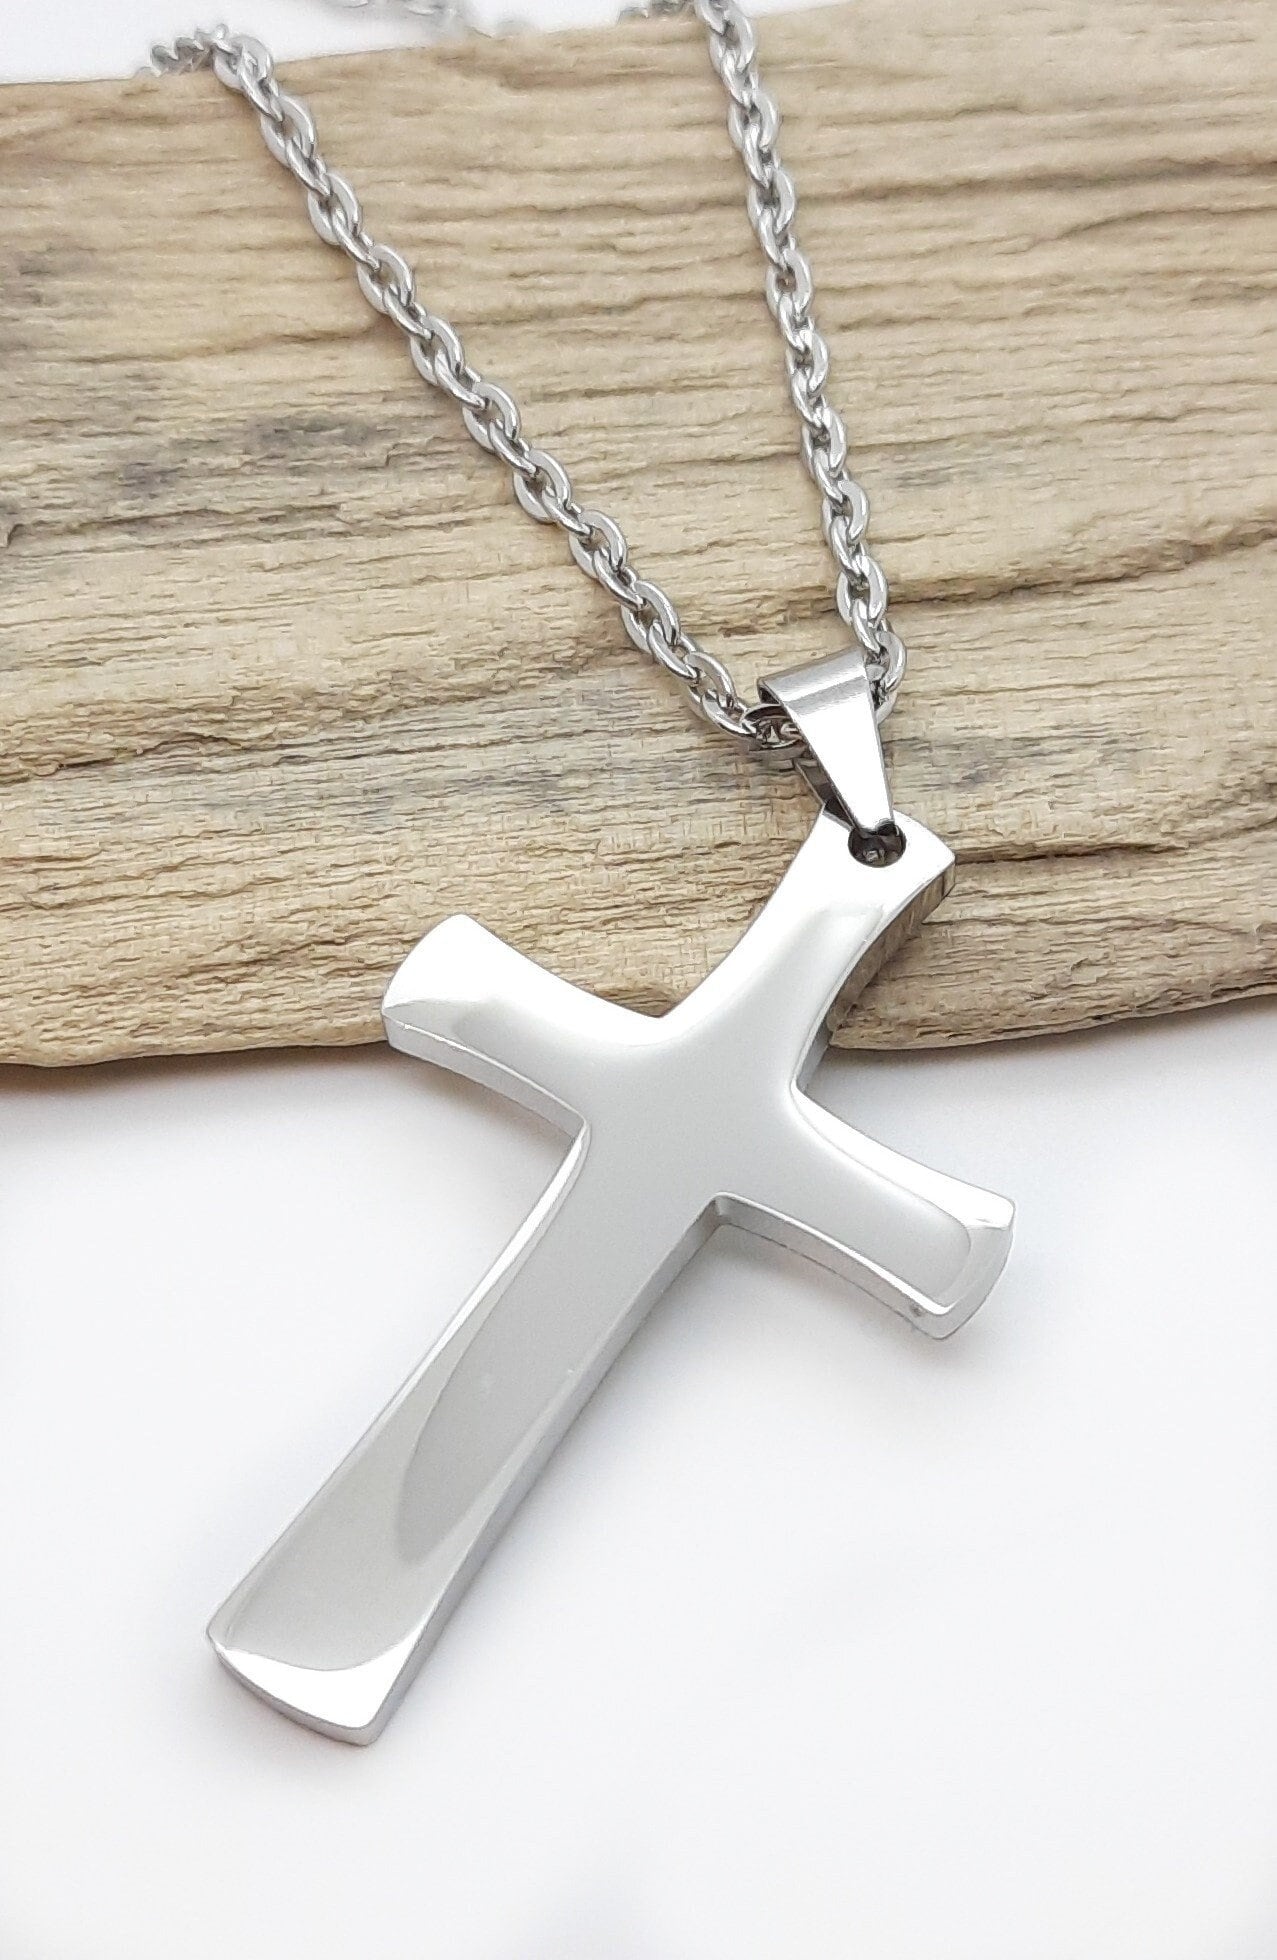 Silver Cross Pendant Necklace, Mens Silver Chain Pendant Silver Crucifix, Mens  Cross Necklace, Mens Gifts Mens Jewelry by Twistedpendant - Etsy UK | Mens  cross necklace, Silver cross pendant, Cross jewelry necklace